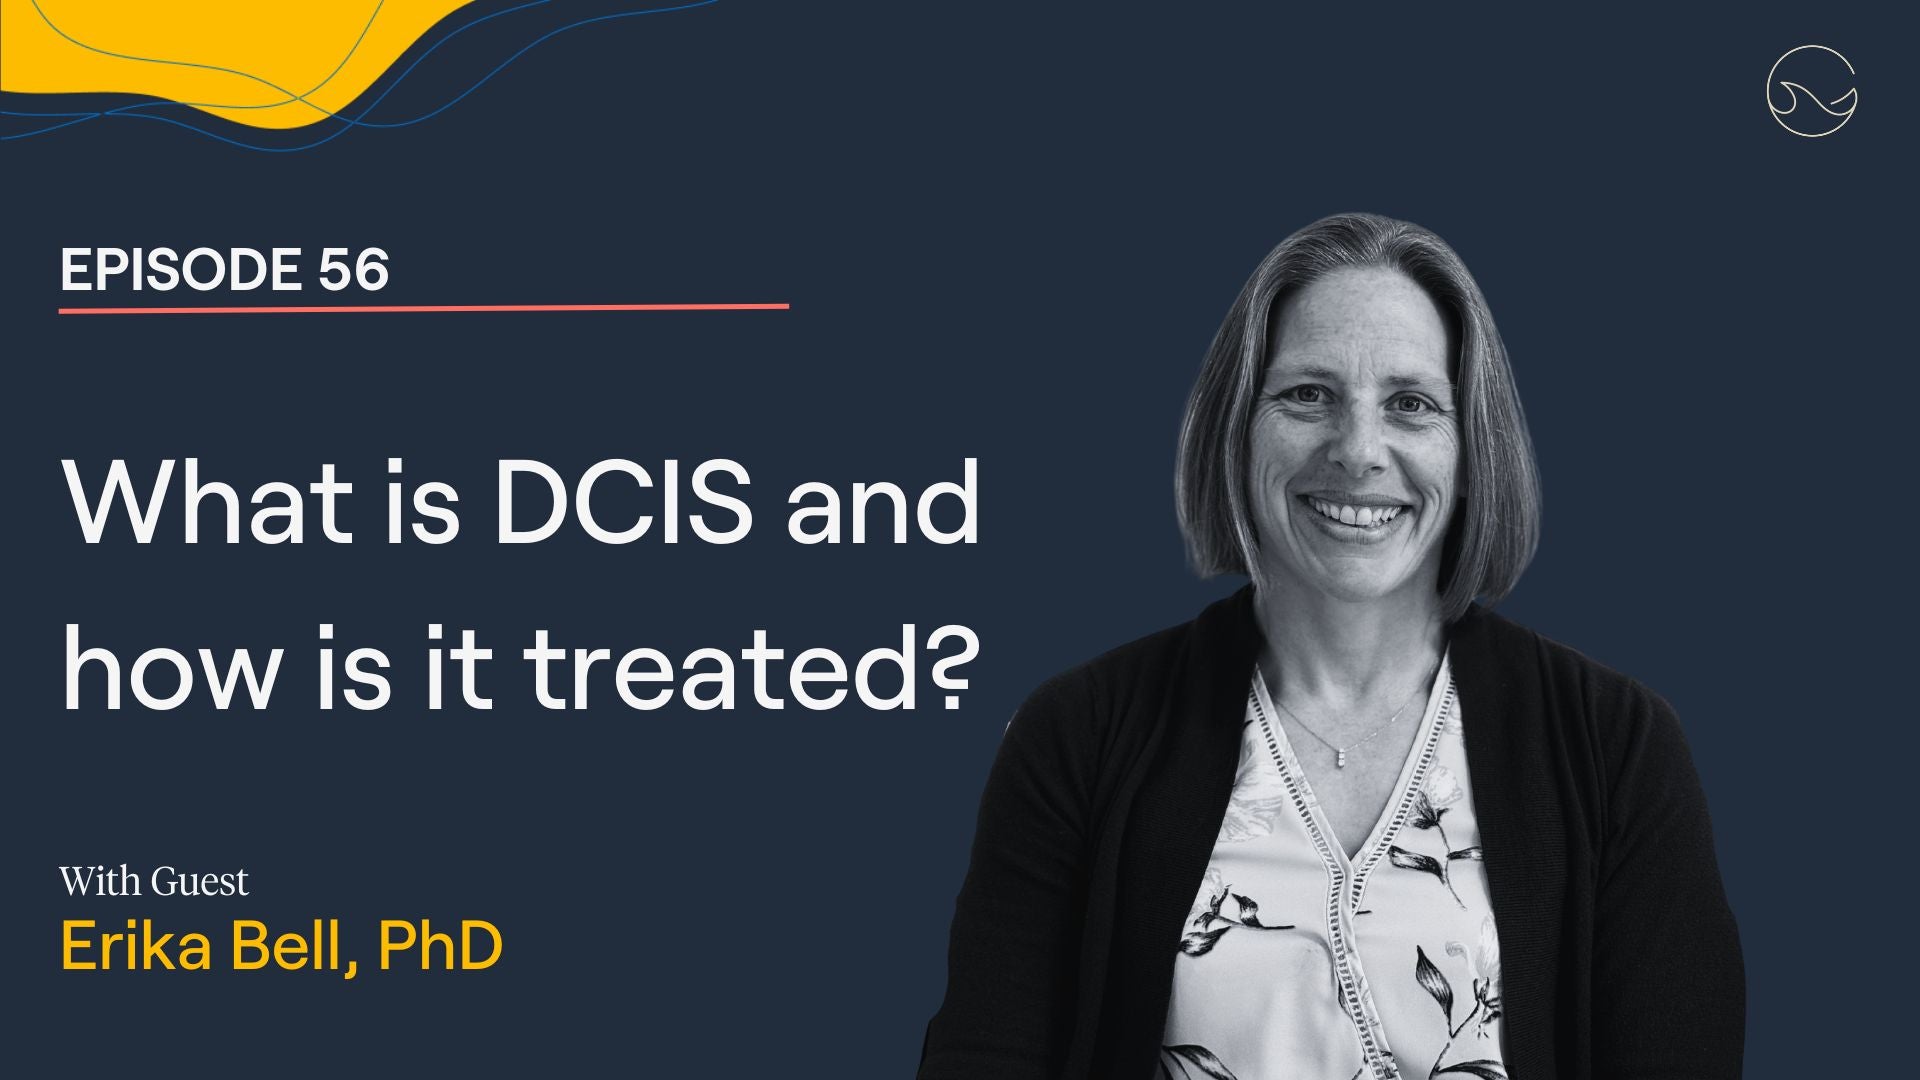 Load video: The latest episode of &quot;The Patient from Hell&quot; features Erika Bell discussing ductal carcinoma in situ, otherwise known as DCIS or stage 0 and its treatment.